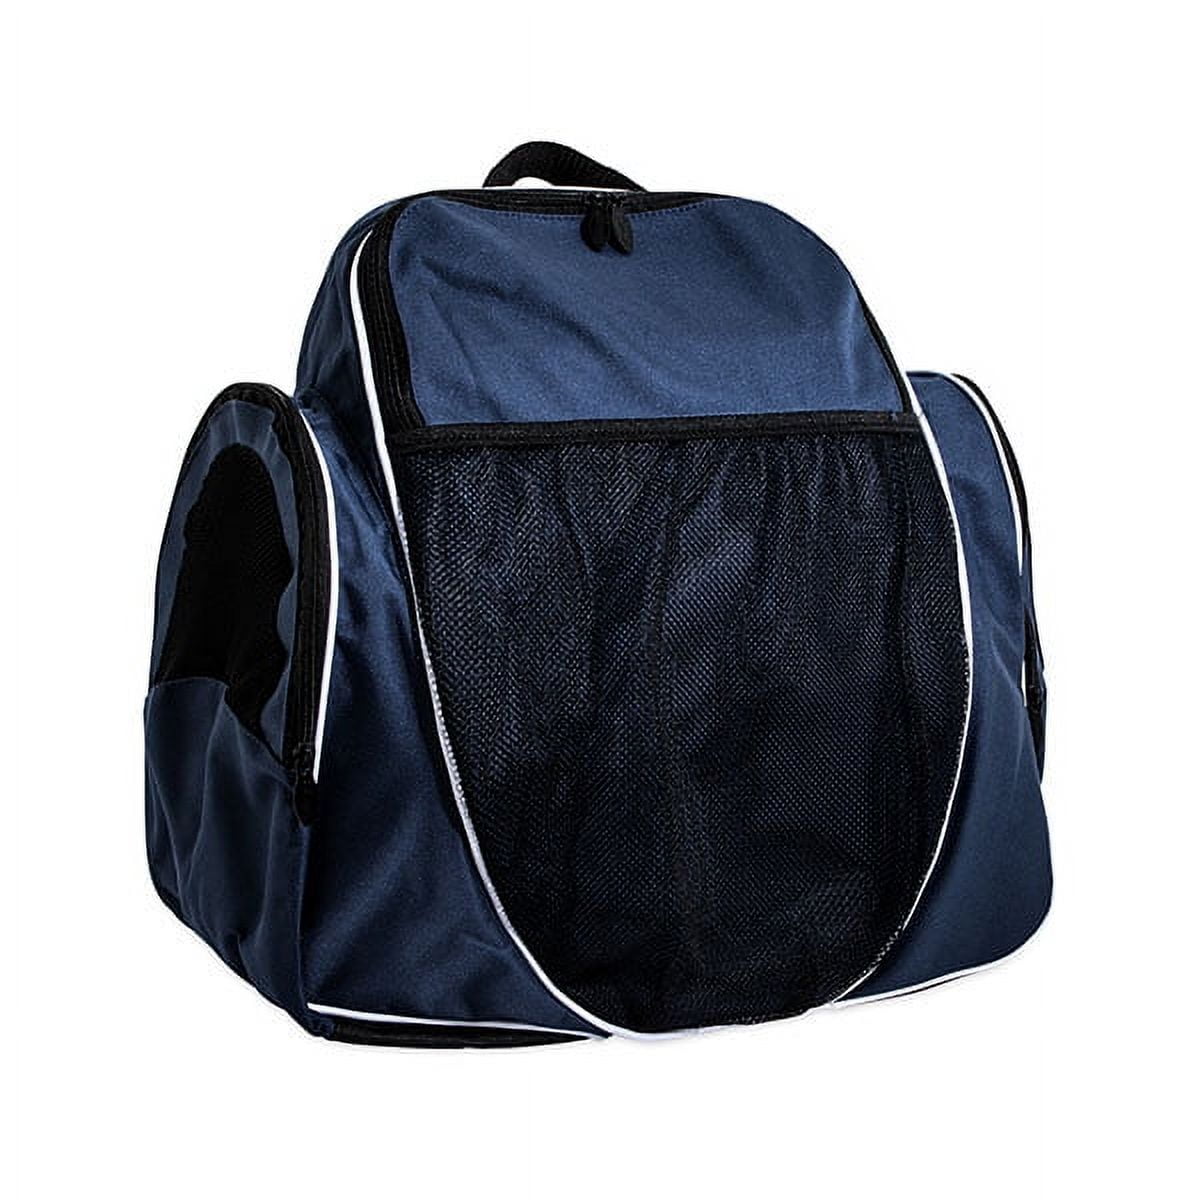 18 X 19 X 10 In. Deluxe All Purpose Backpack, Navy